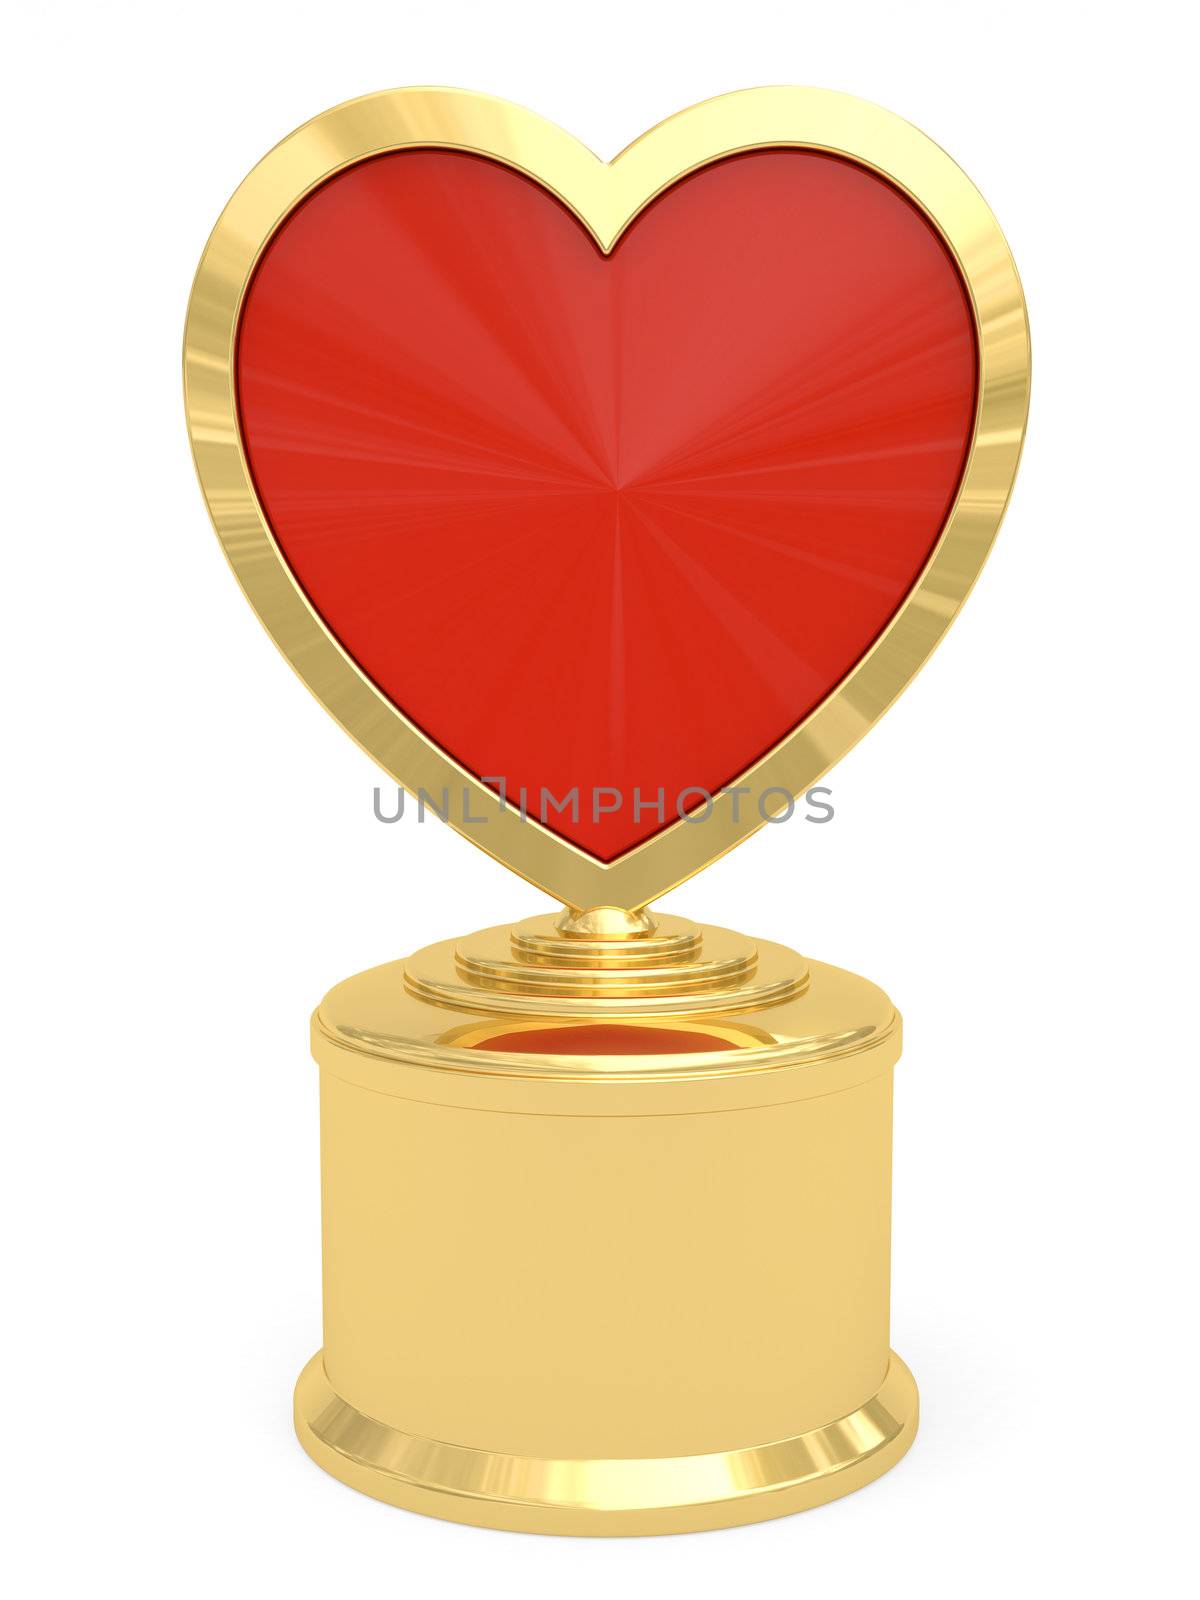 Golden heart shaped prize on white by oneo